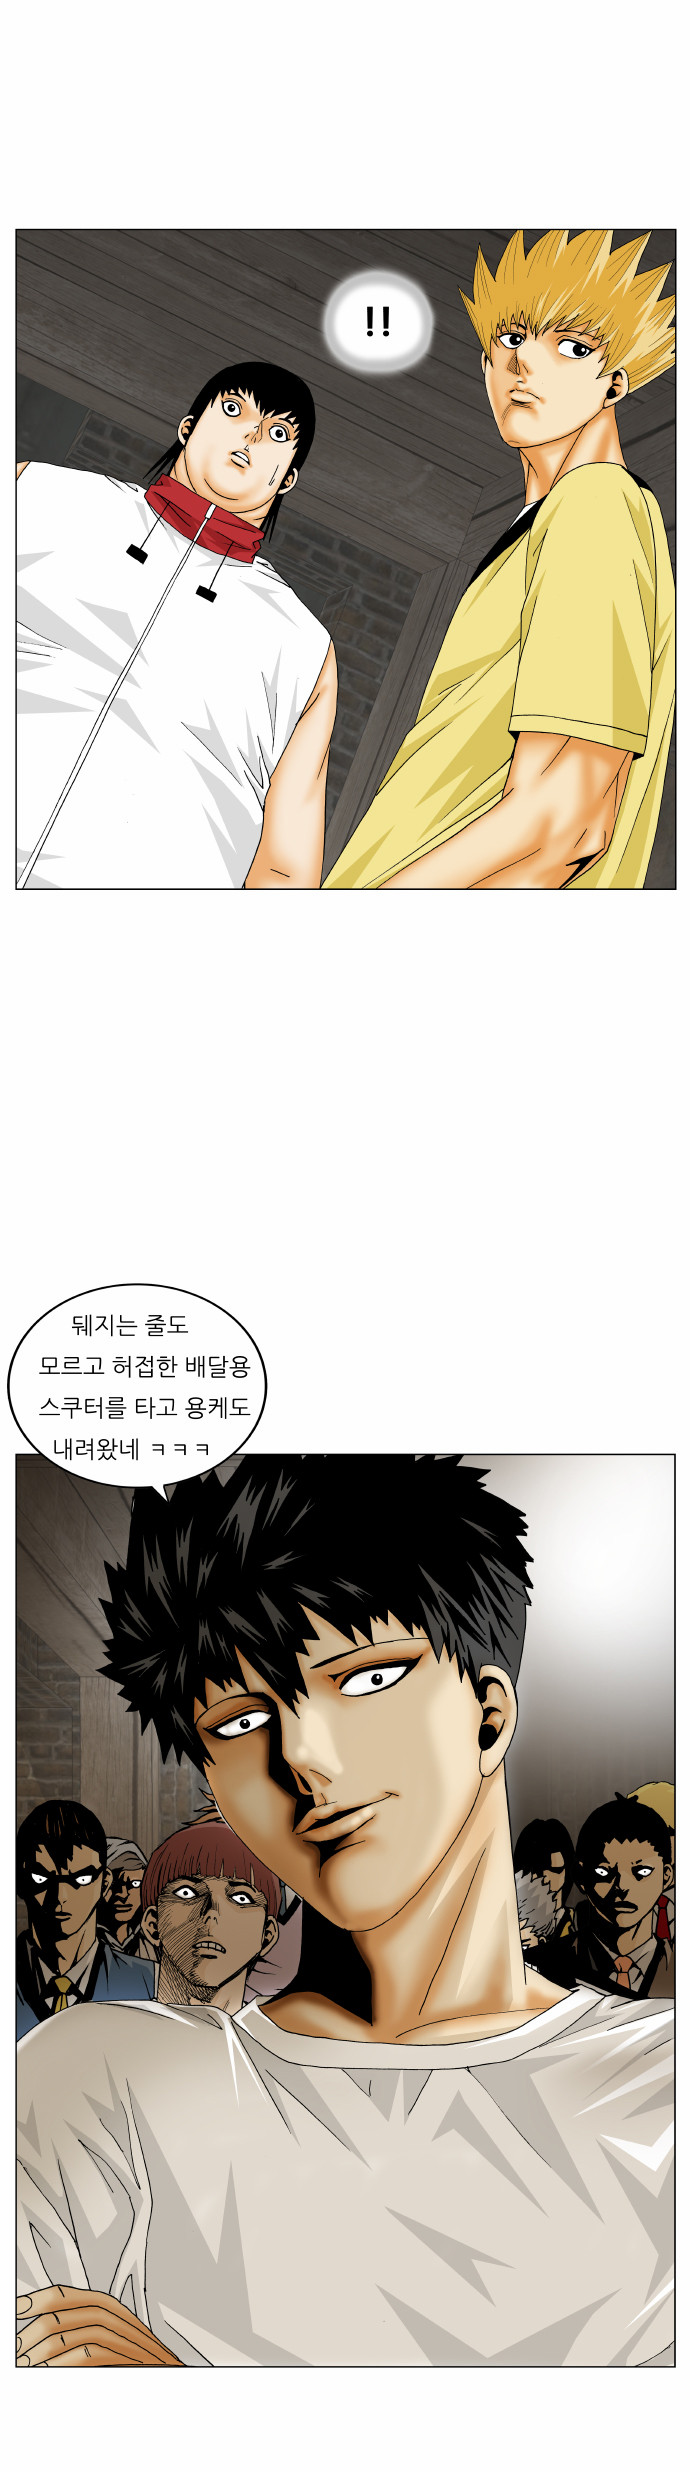 Ultimate Legend - Kang Hae Hyo - Chapter 169 - Page 47